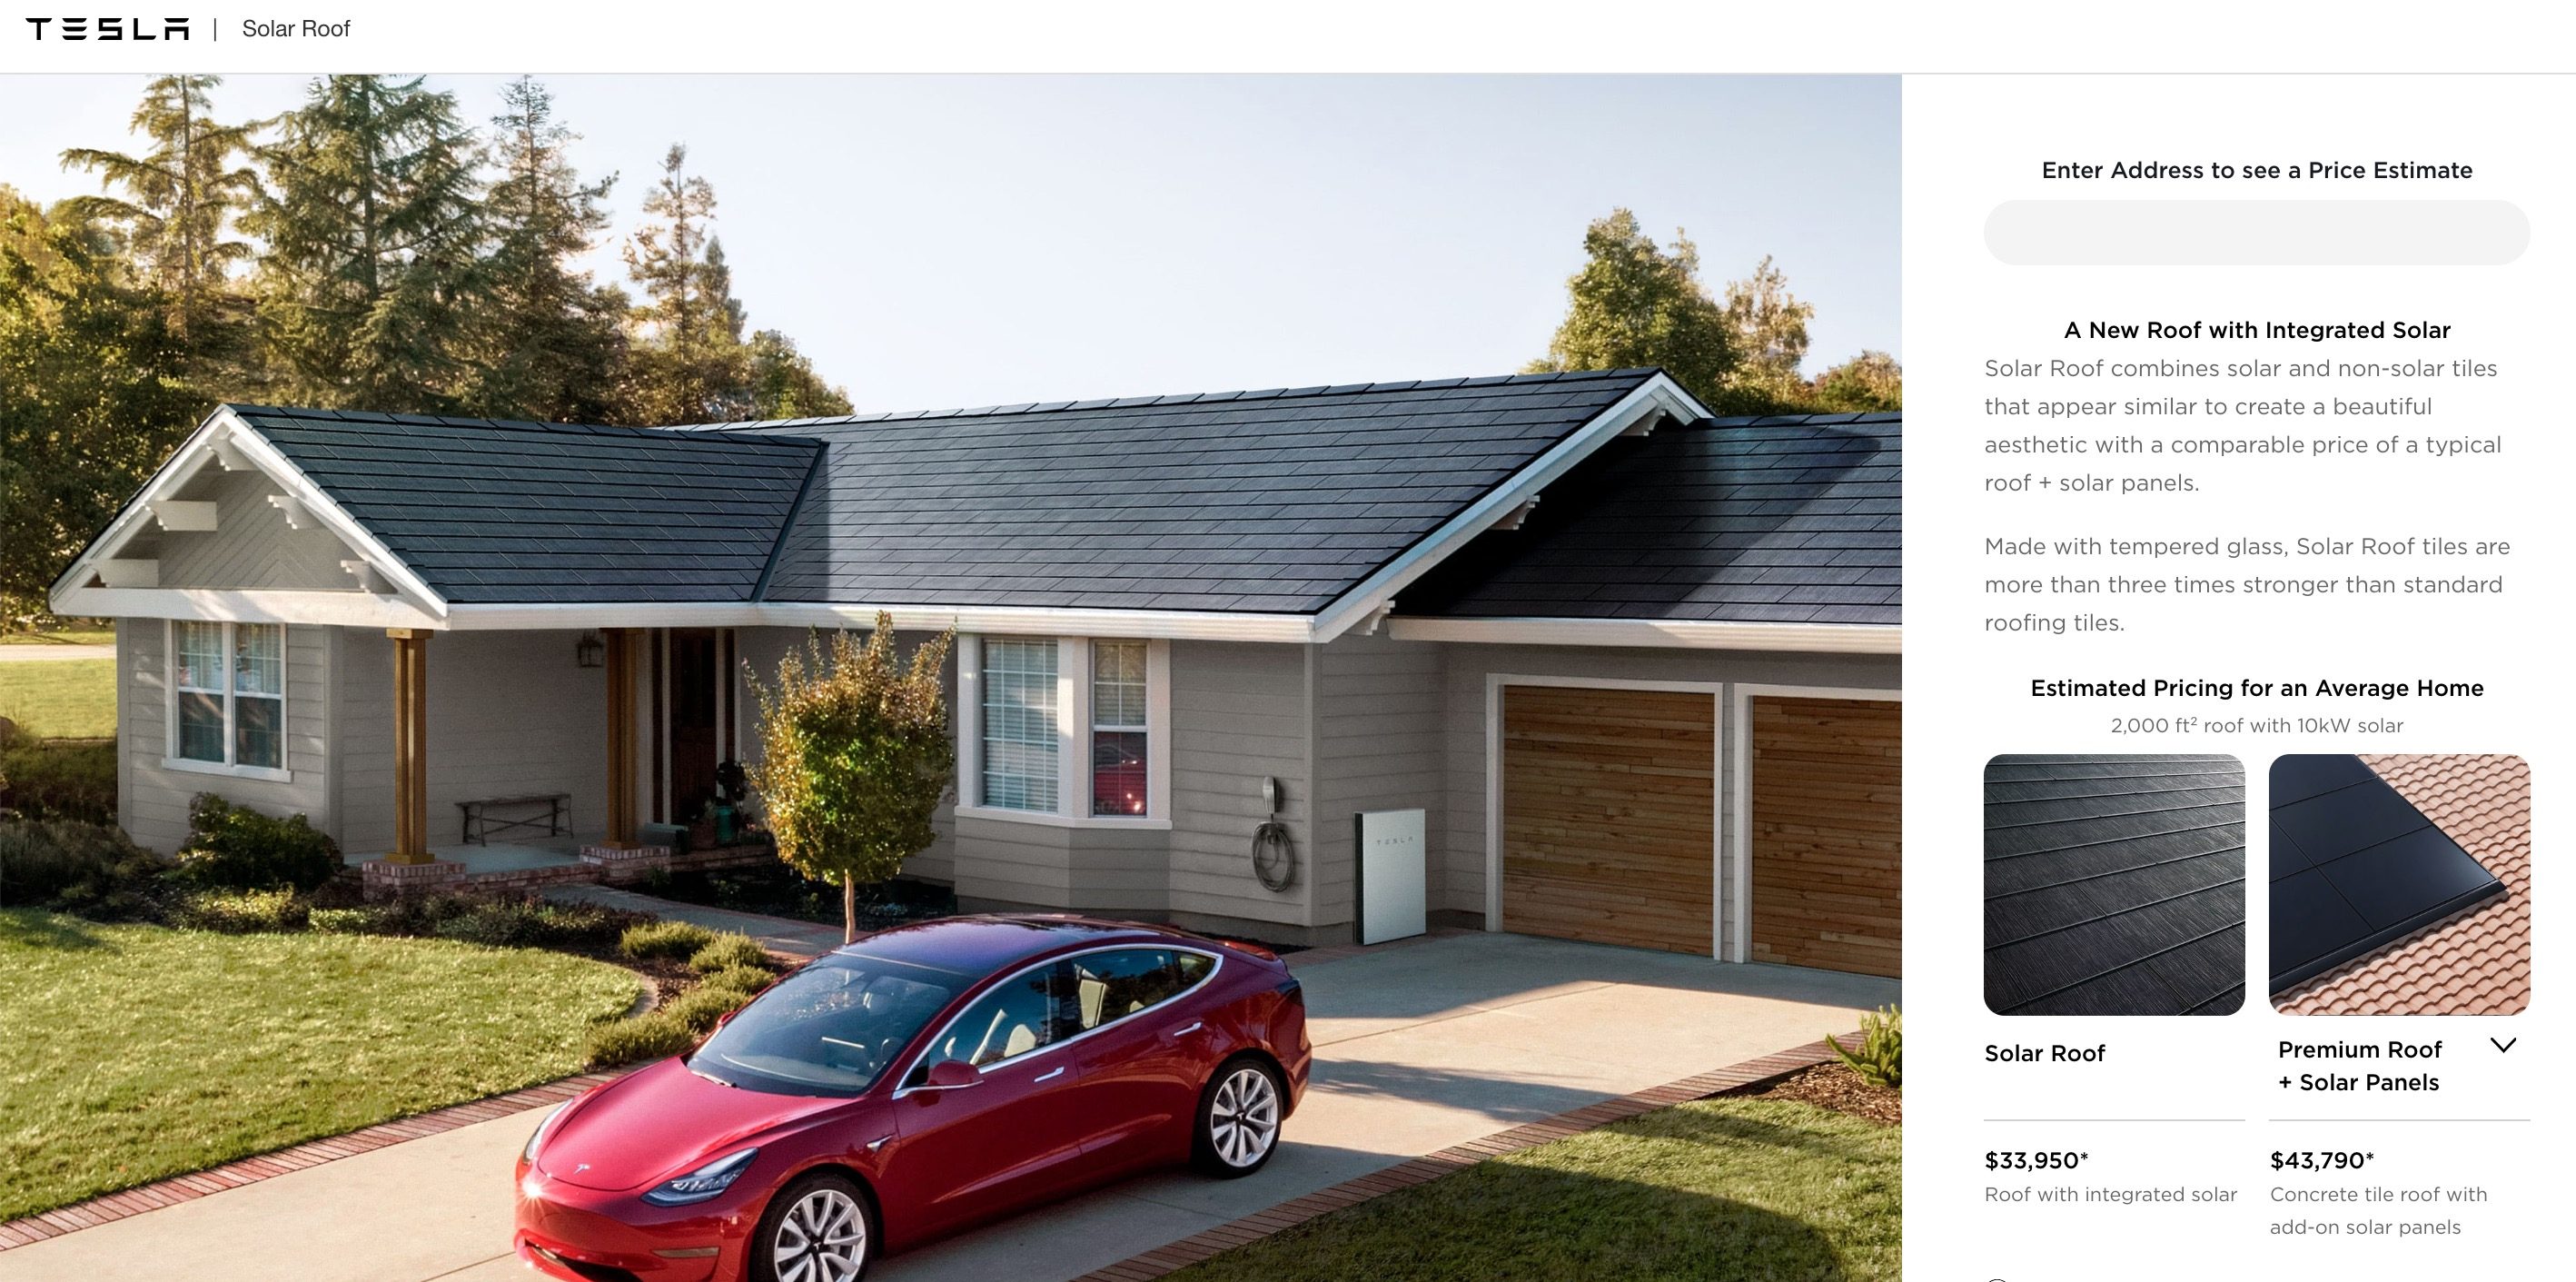 Tesla launches Solarglass (Solar Roof V3) starting at 33,950 for